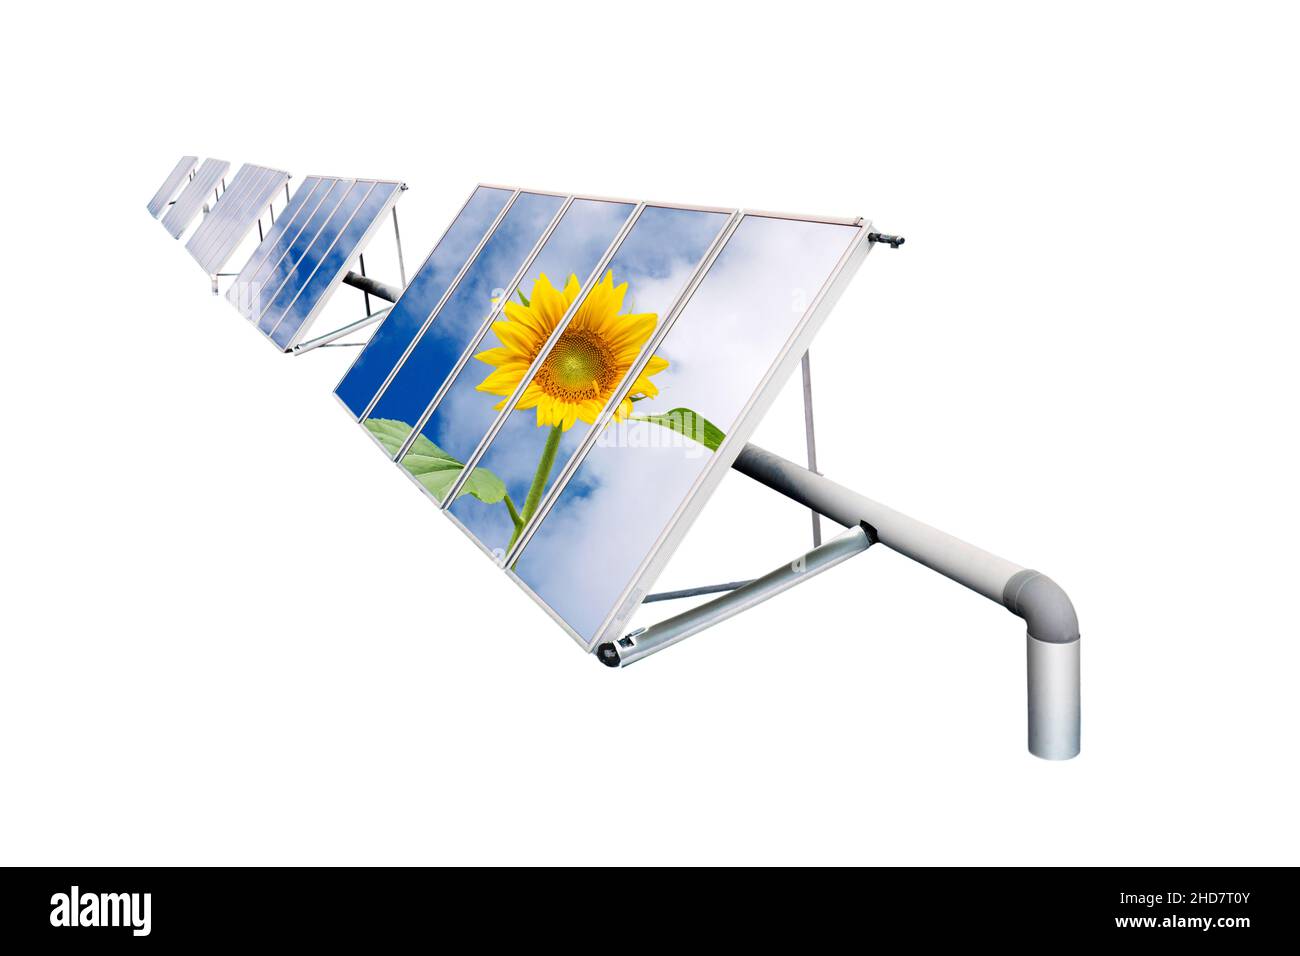 Solar cell panels array with sky and sunflower surface isolated on white. Green energy concept. Stock Photo